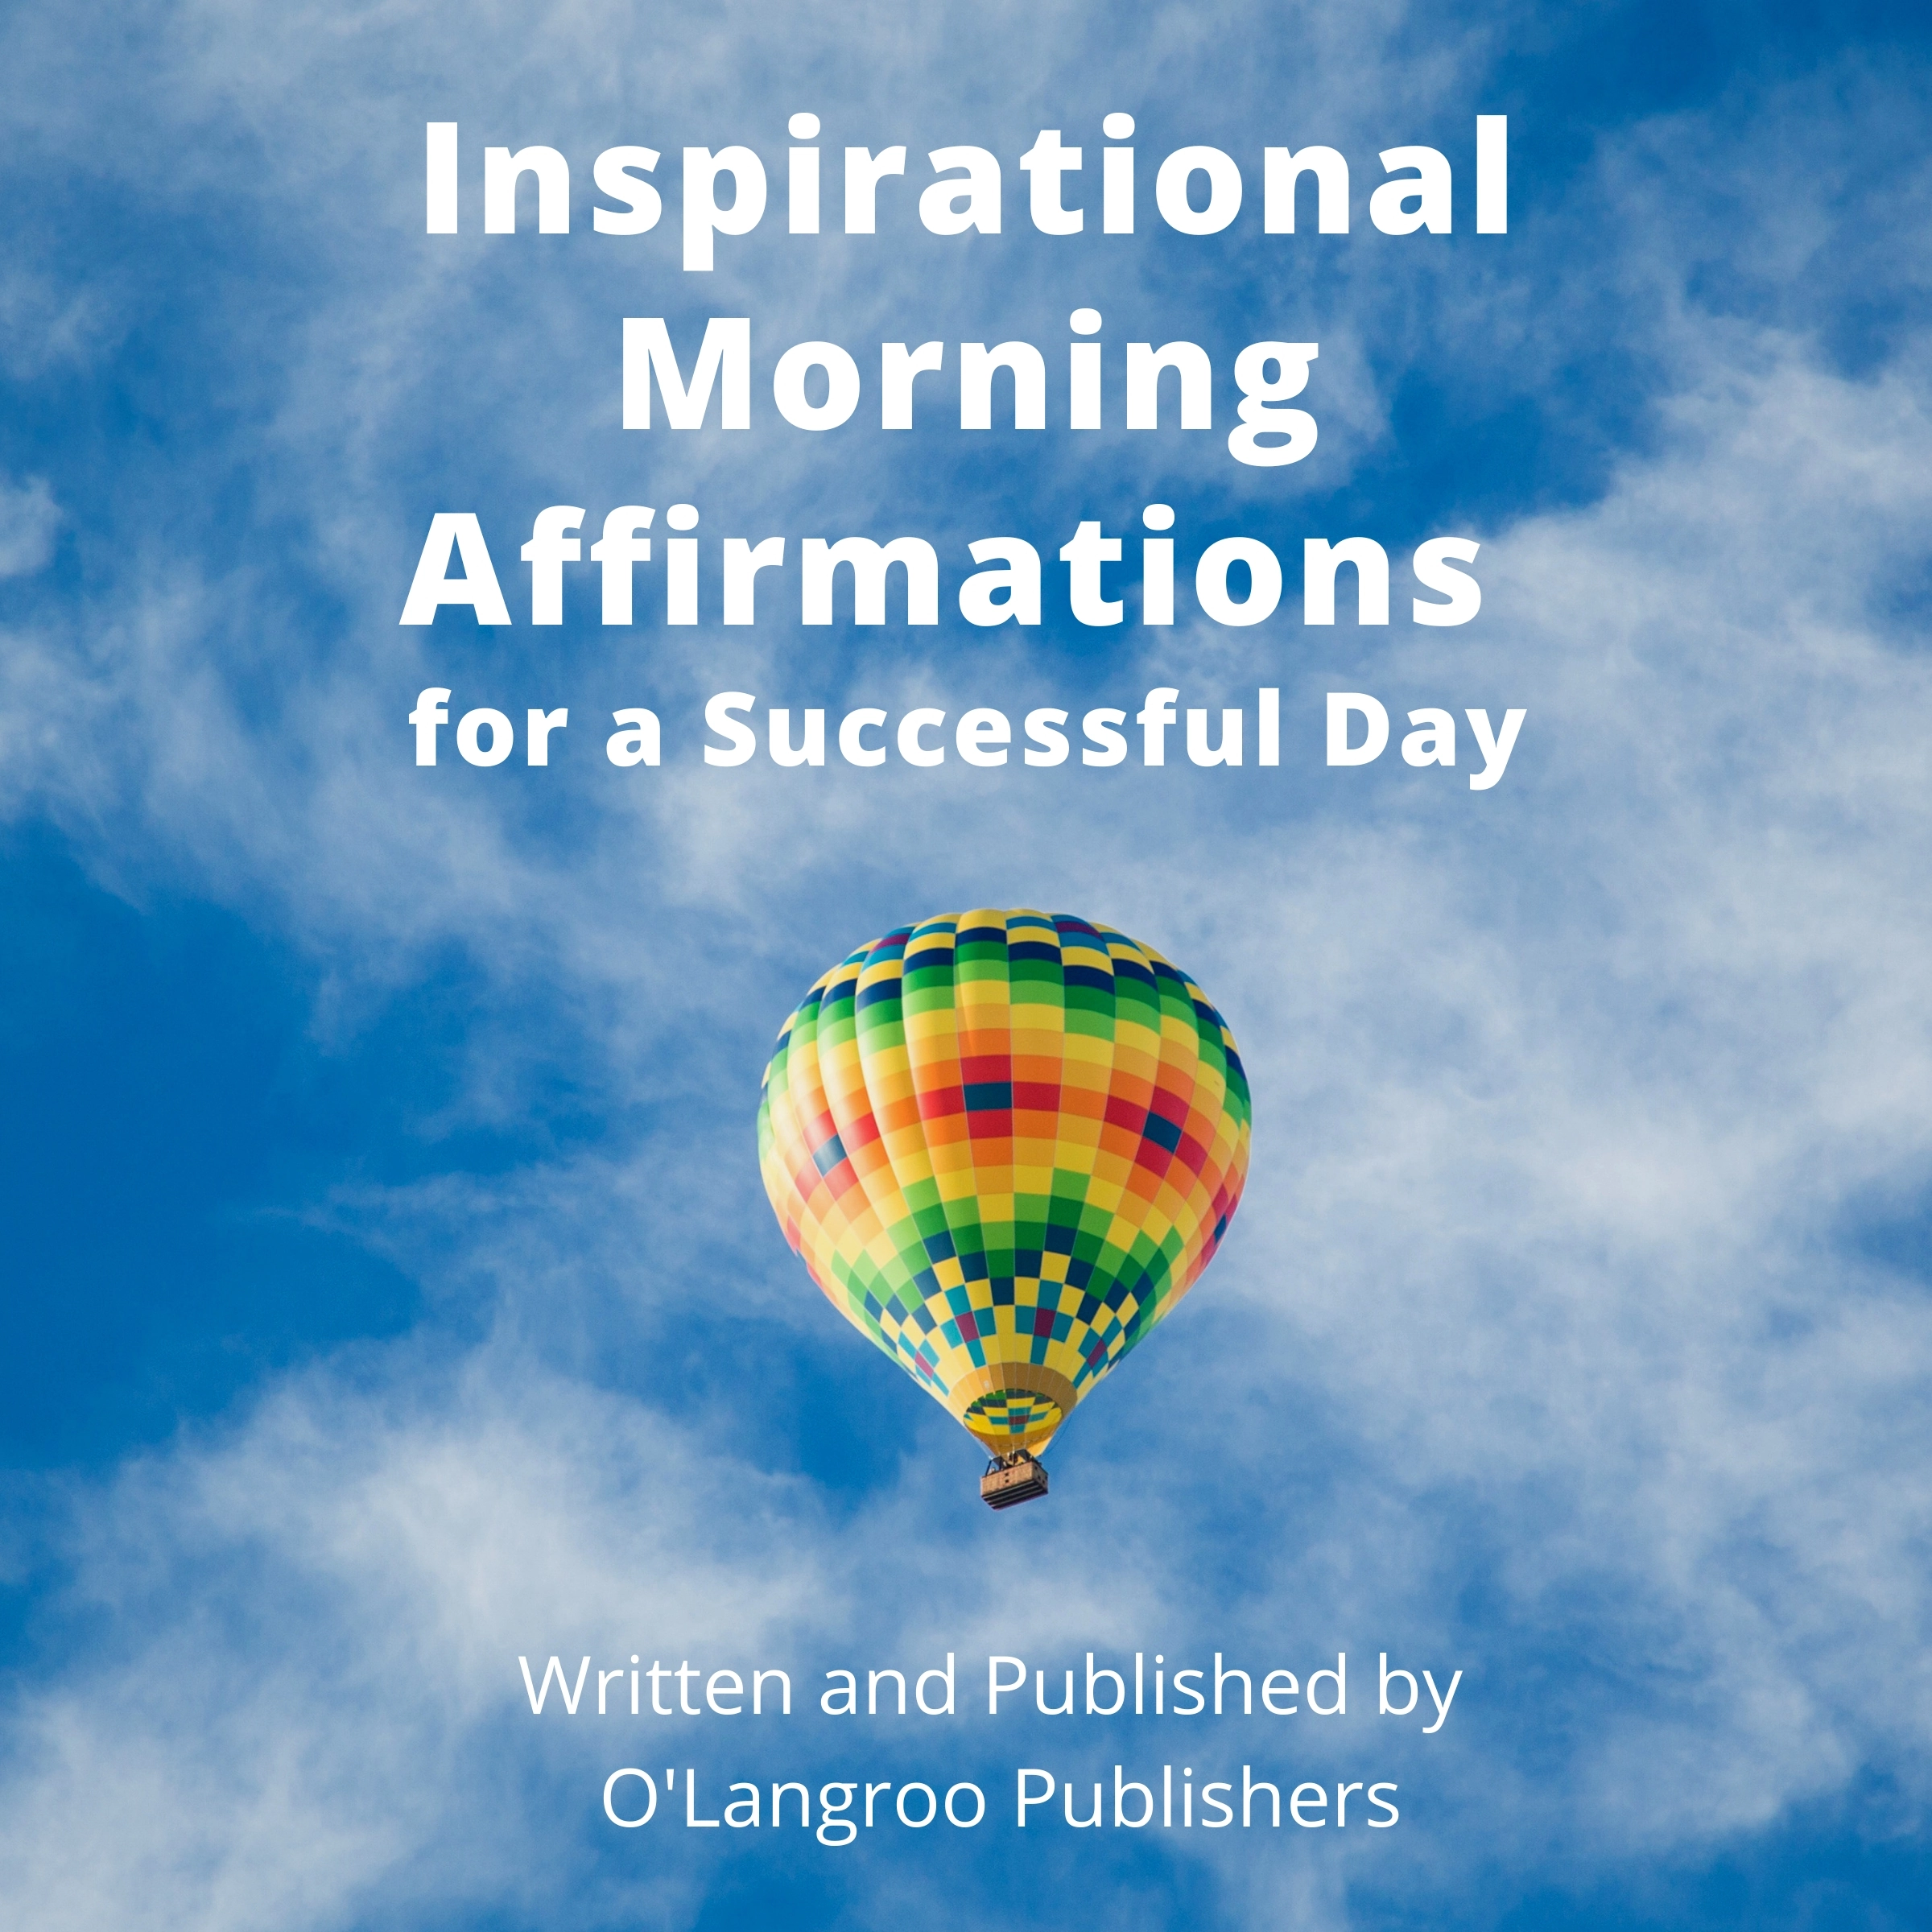 Inspirational Morning Affirmations for a Successful Day by O'Langroo Publishers Audiobook